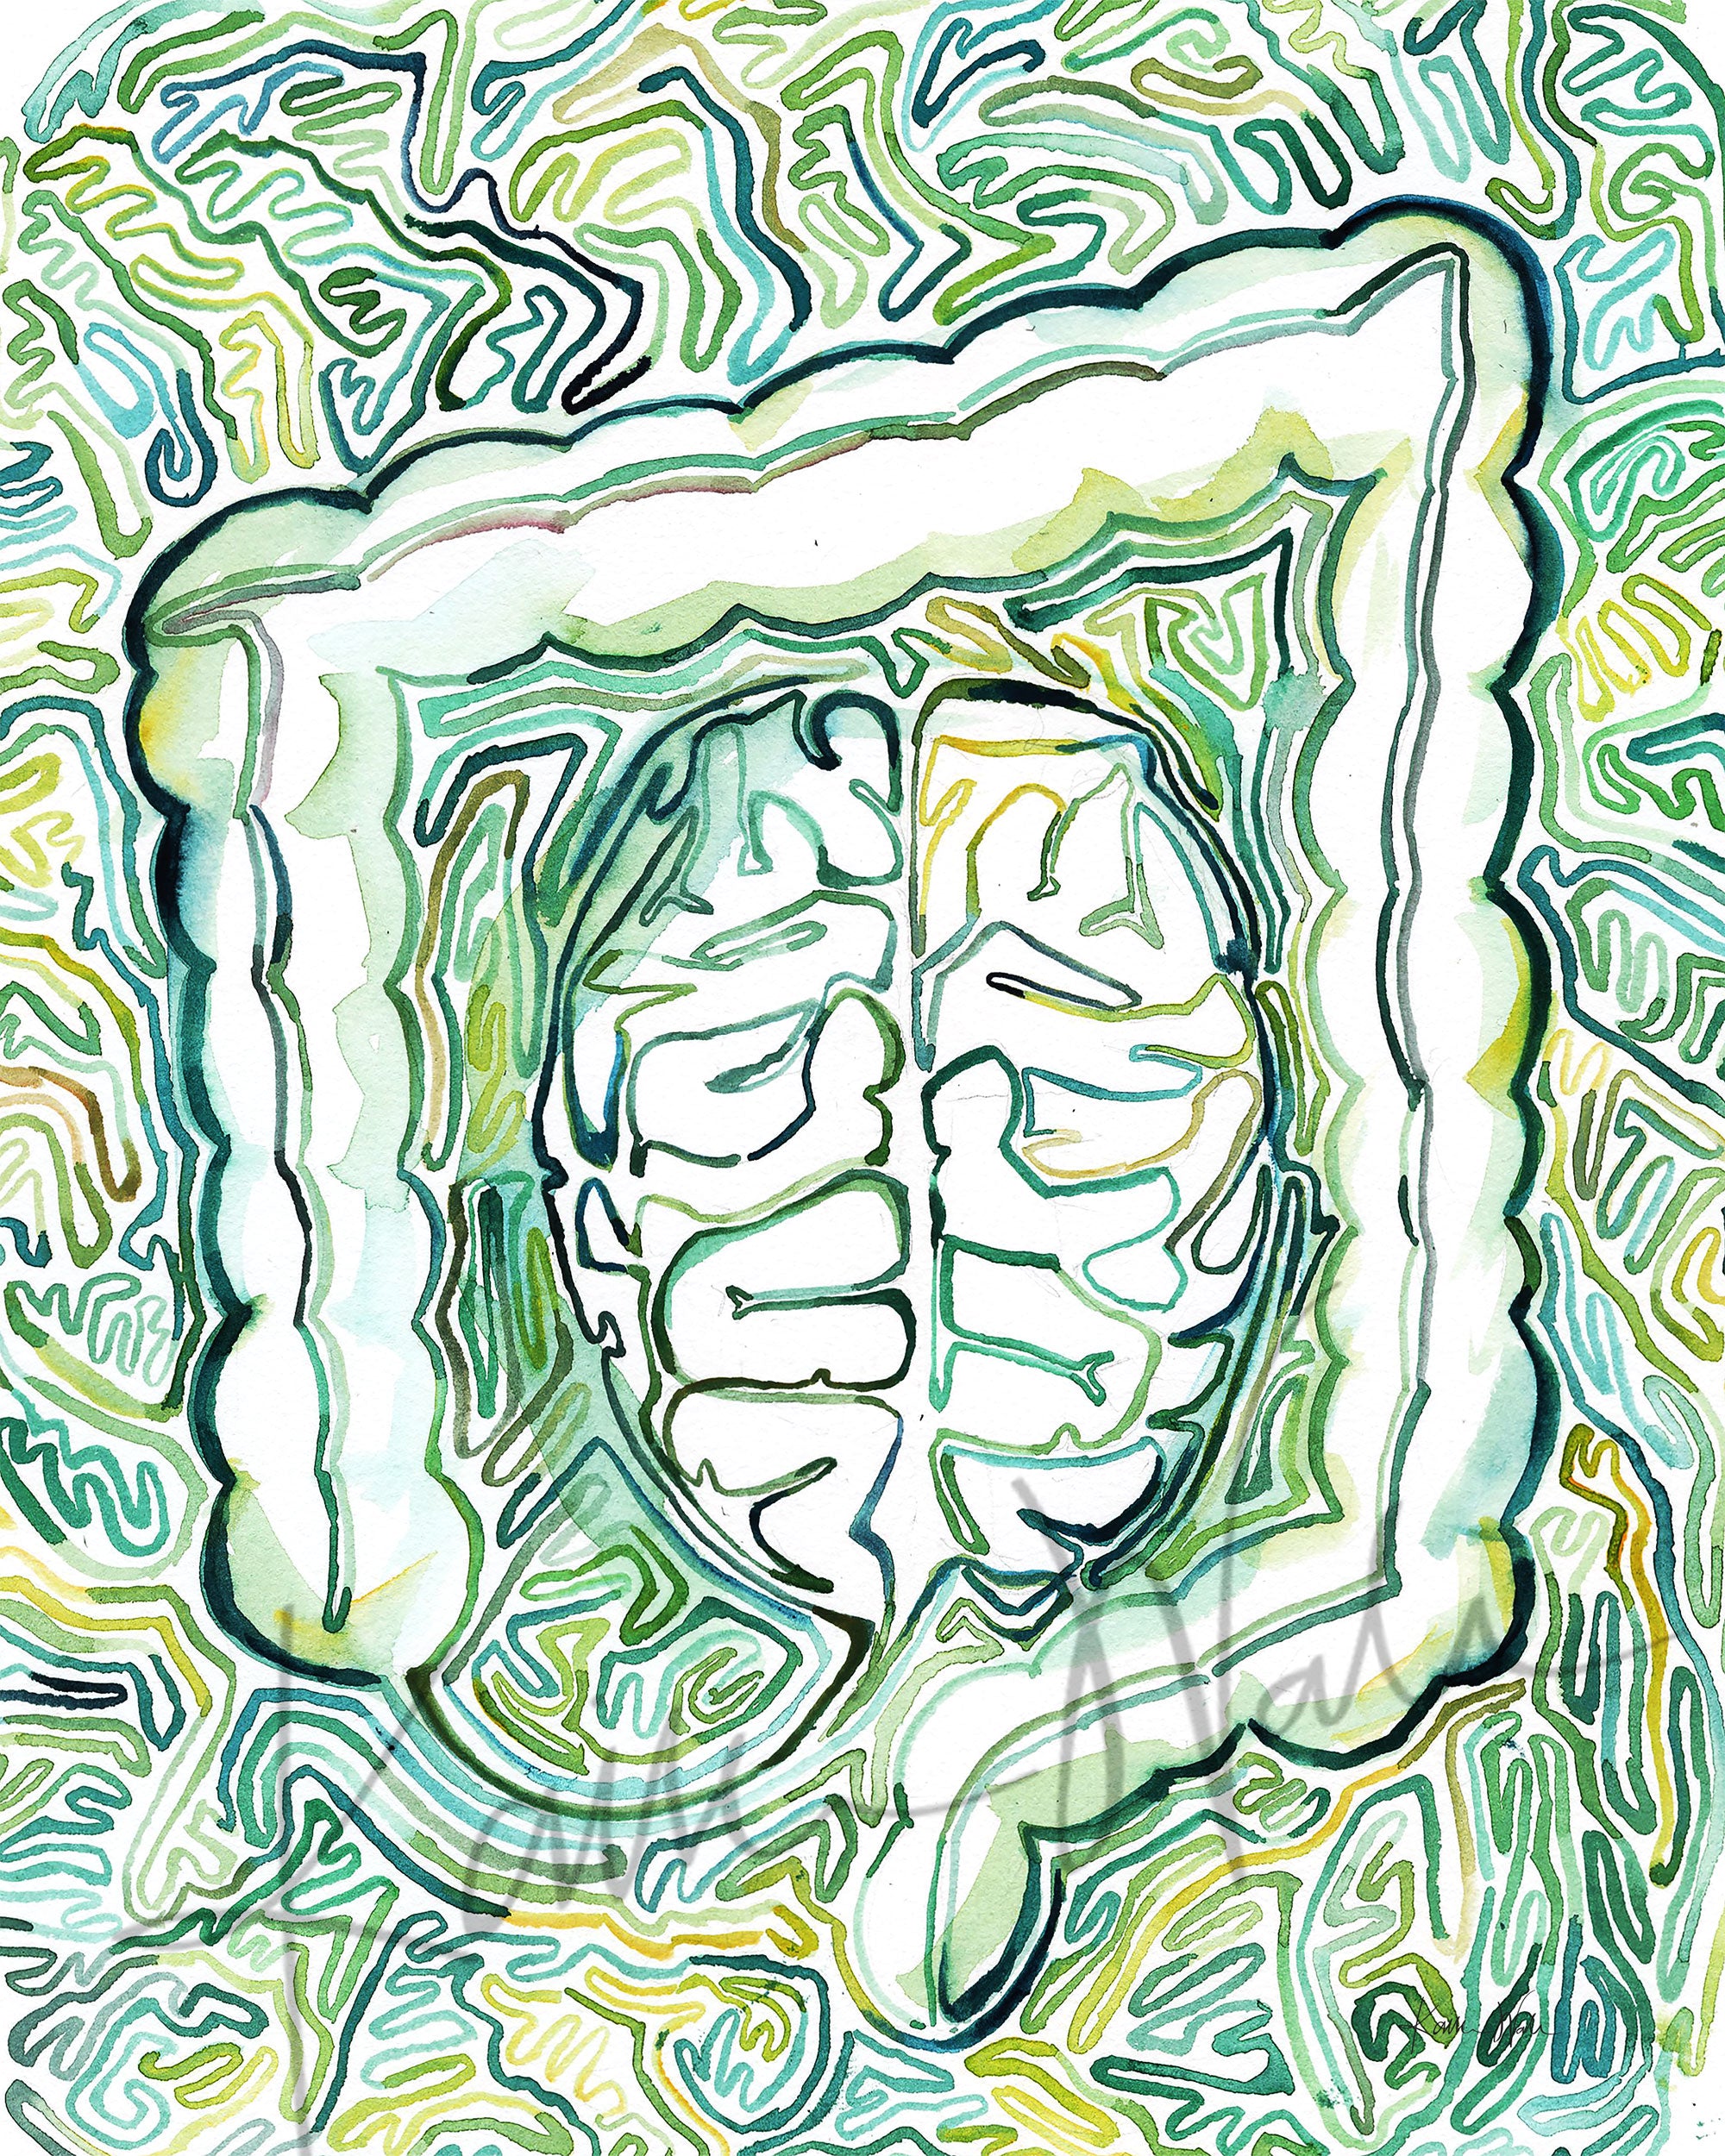 Unframed watercolor painting of a portrayal of the gut-mind-body connection.